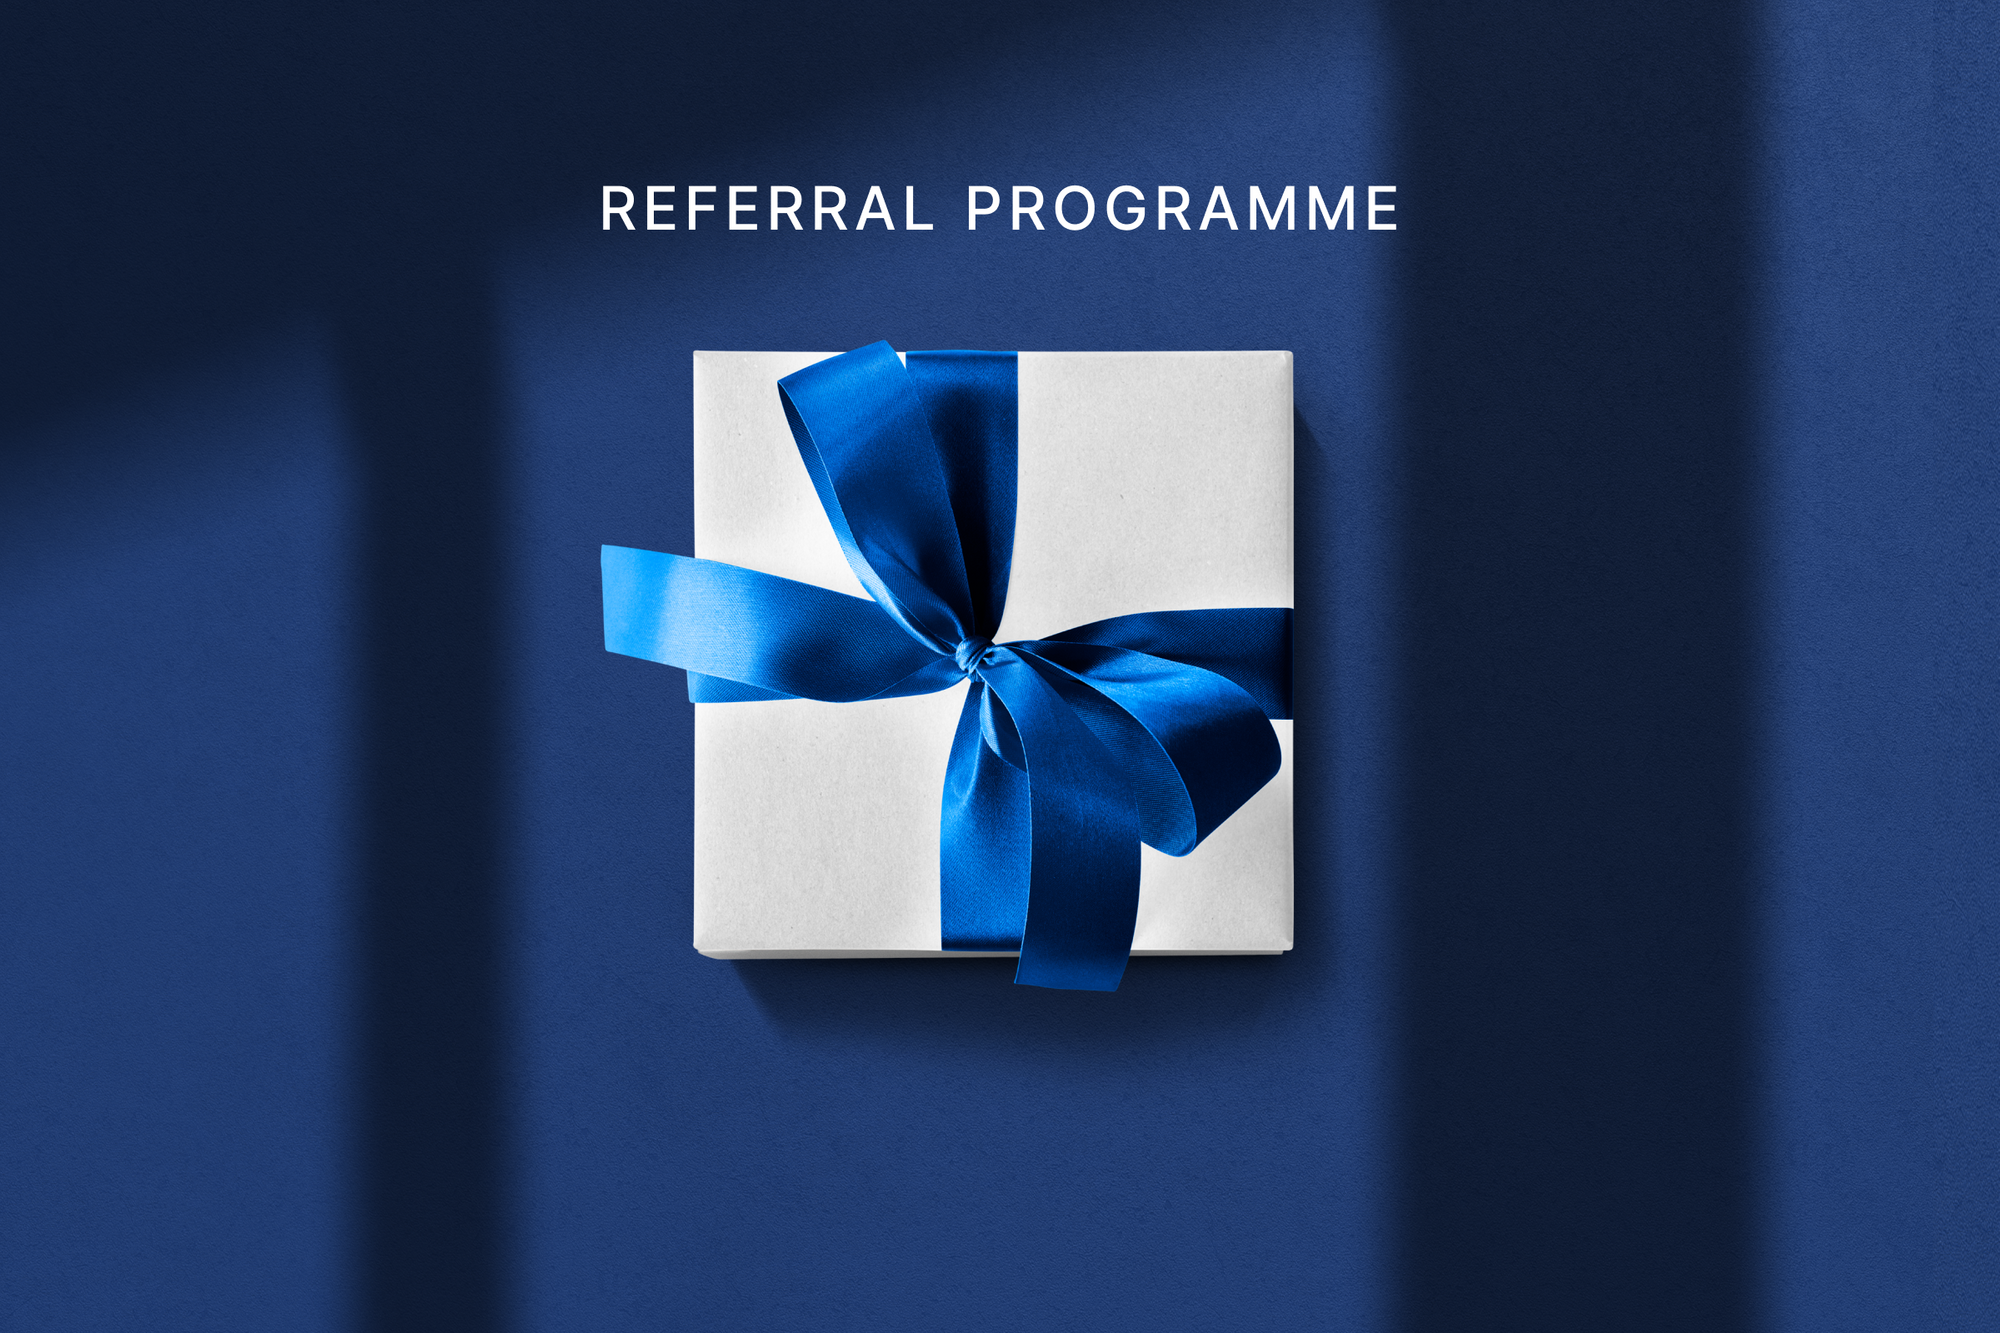 New Tiered Referral Programme